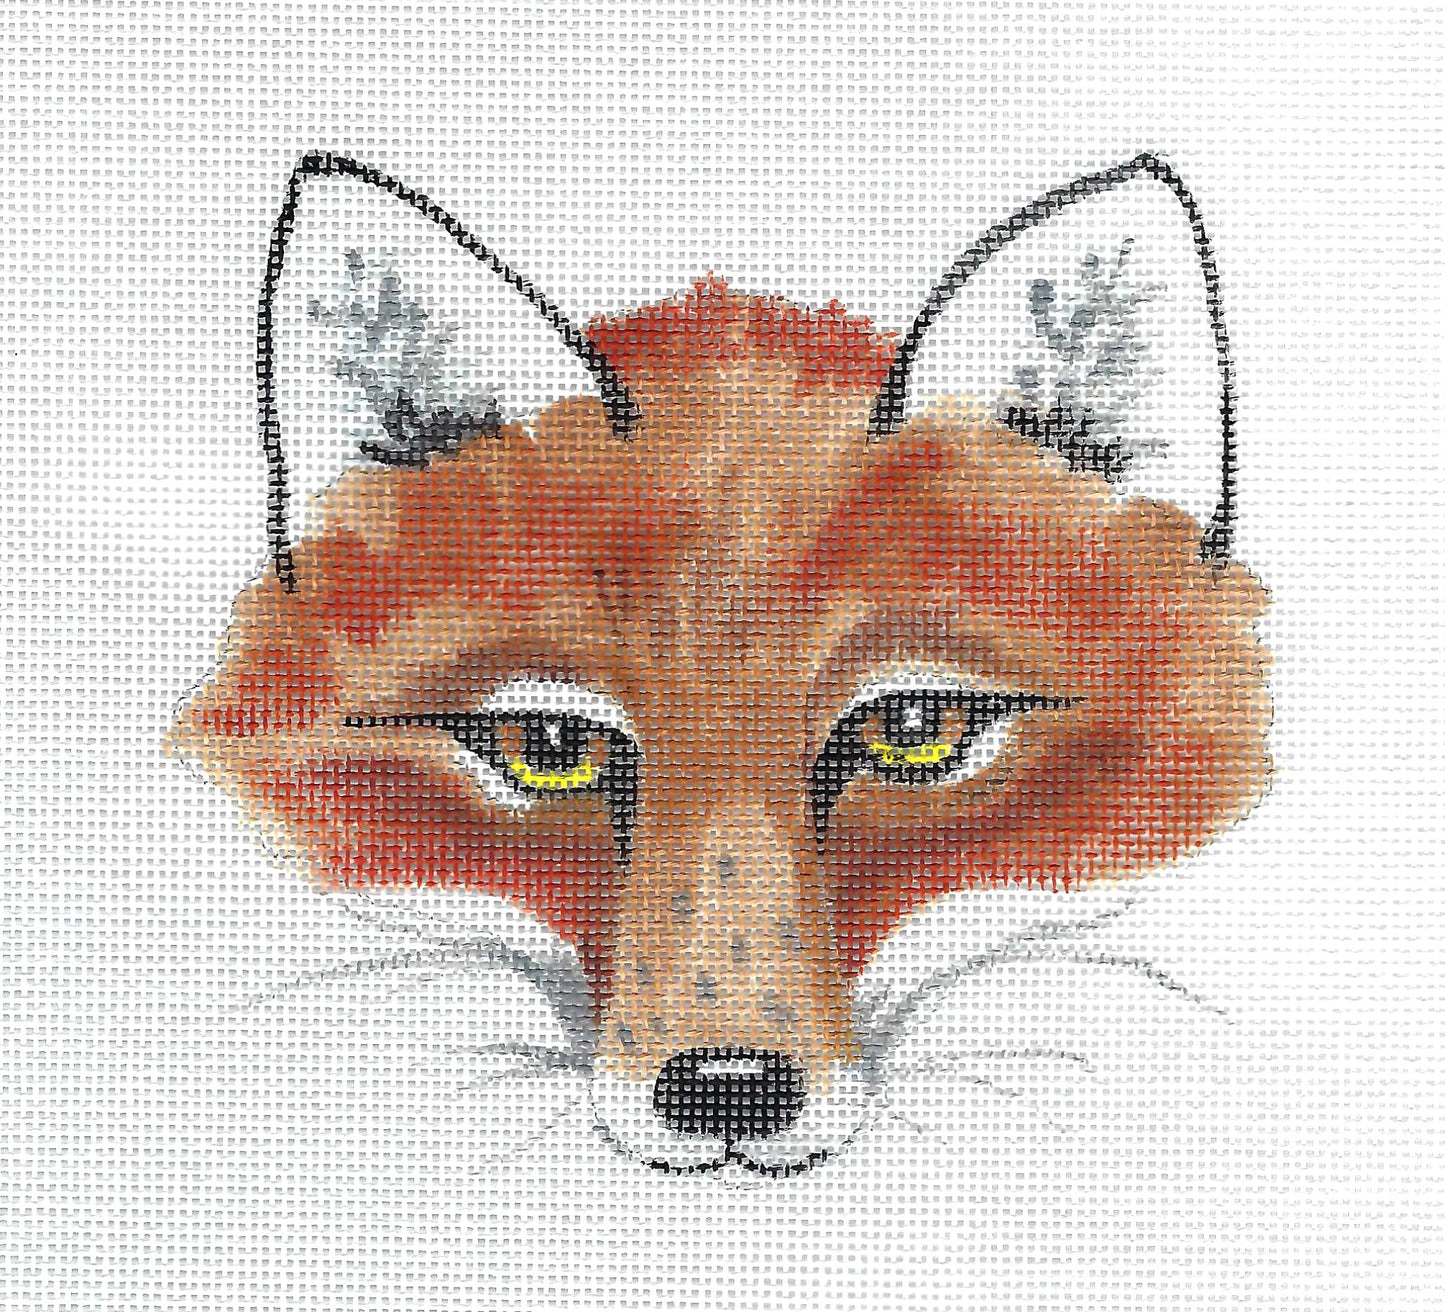 Fox Canvas ~ Life-like Red Fox Face handpainted 18 mesh Needlepoint Canvas by Barbara Eyre from Susan Roberts *** RETIRED ***